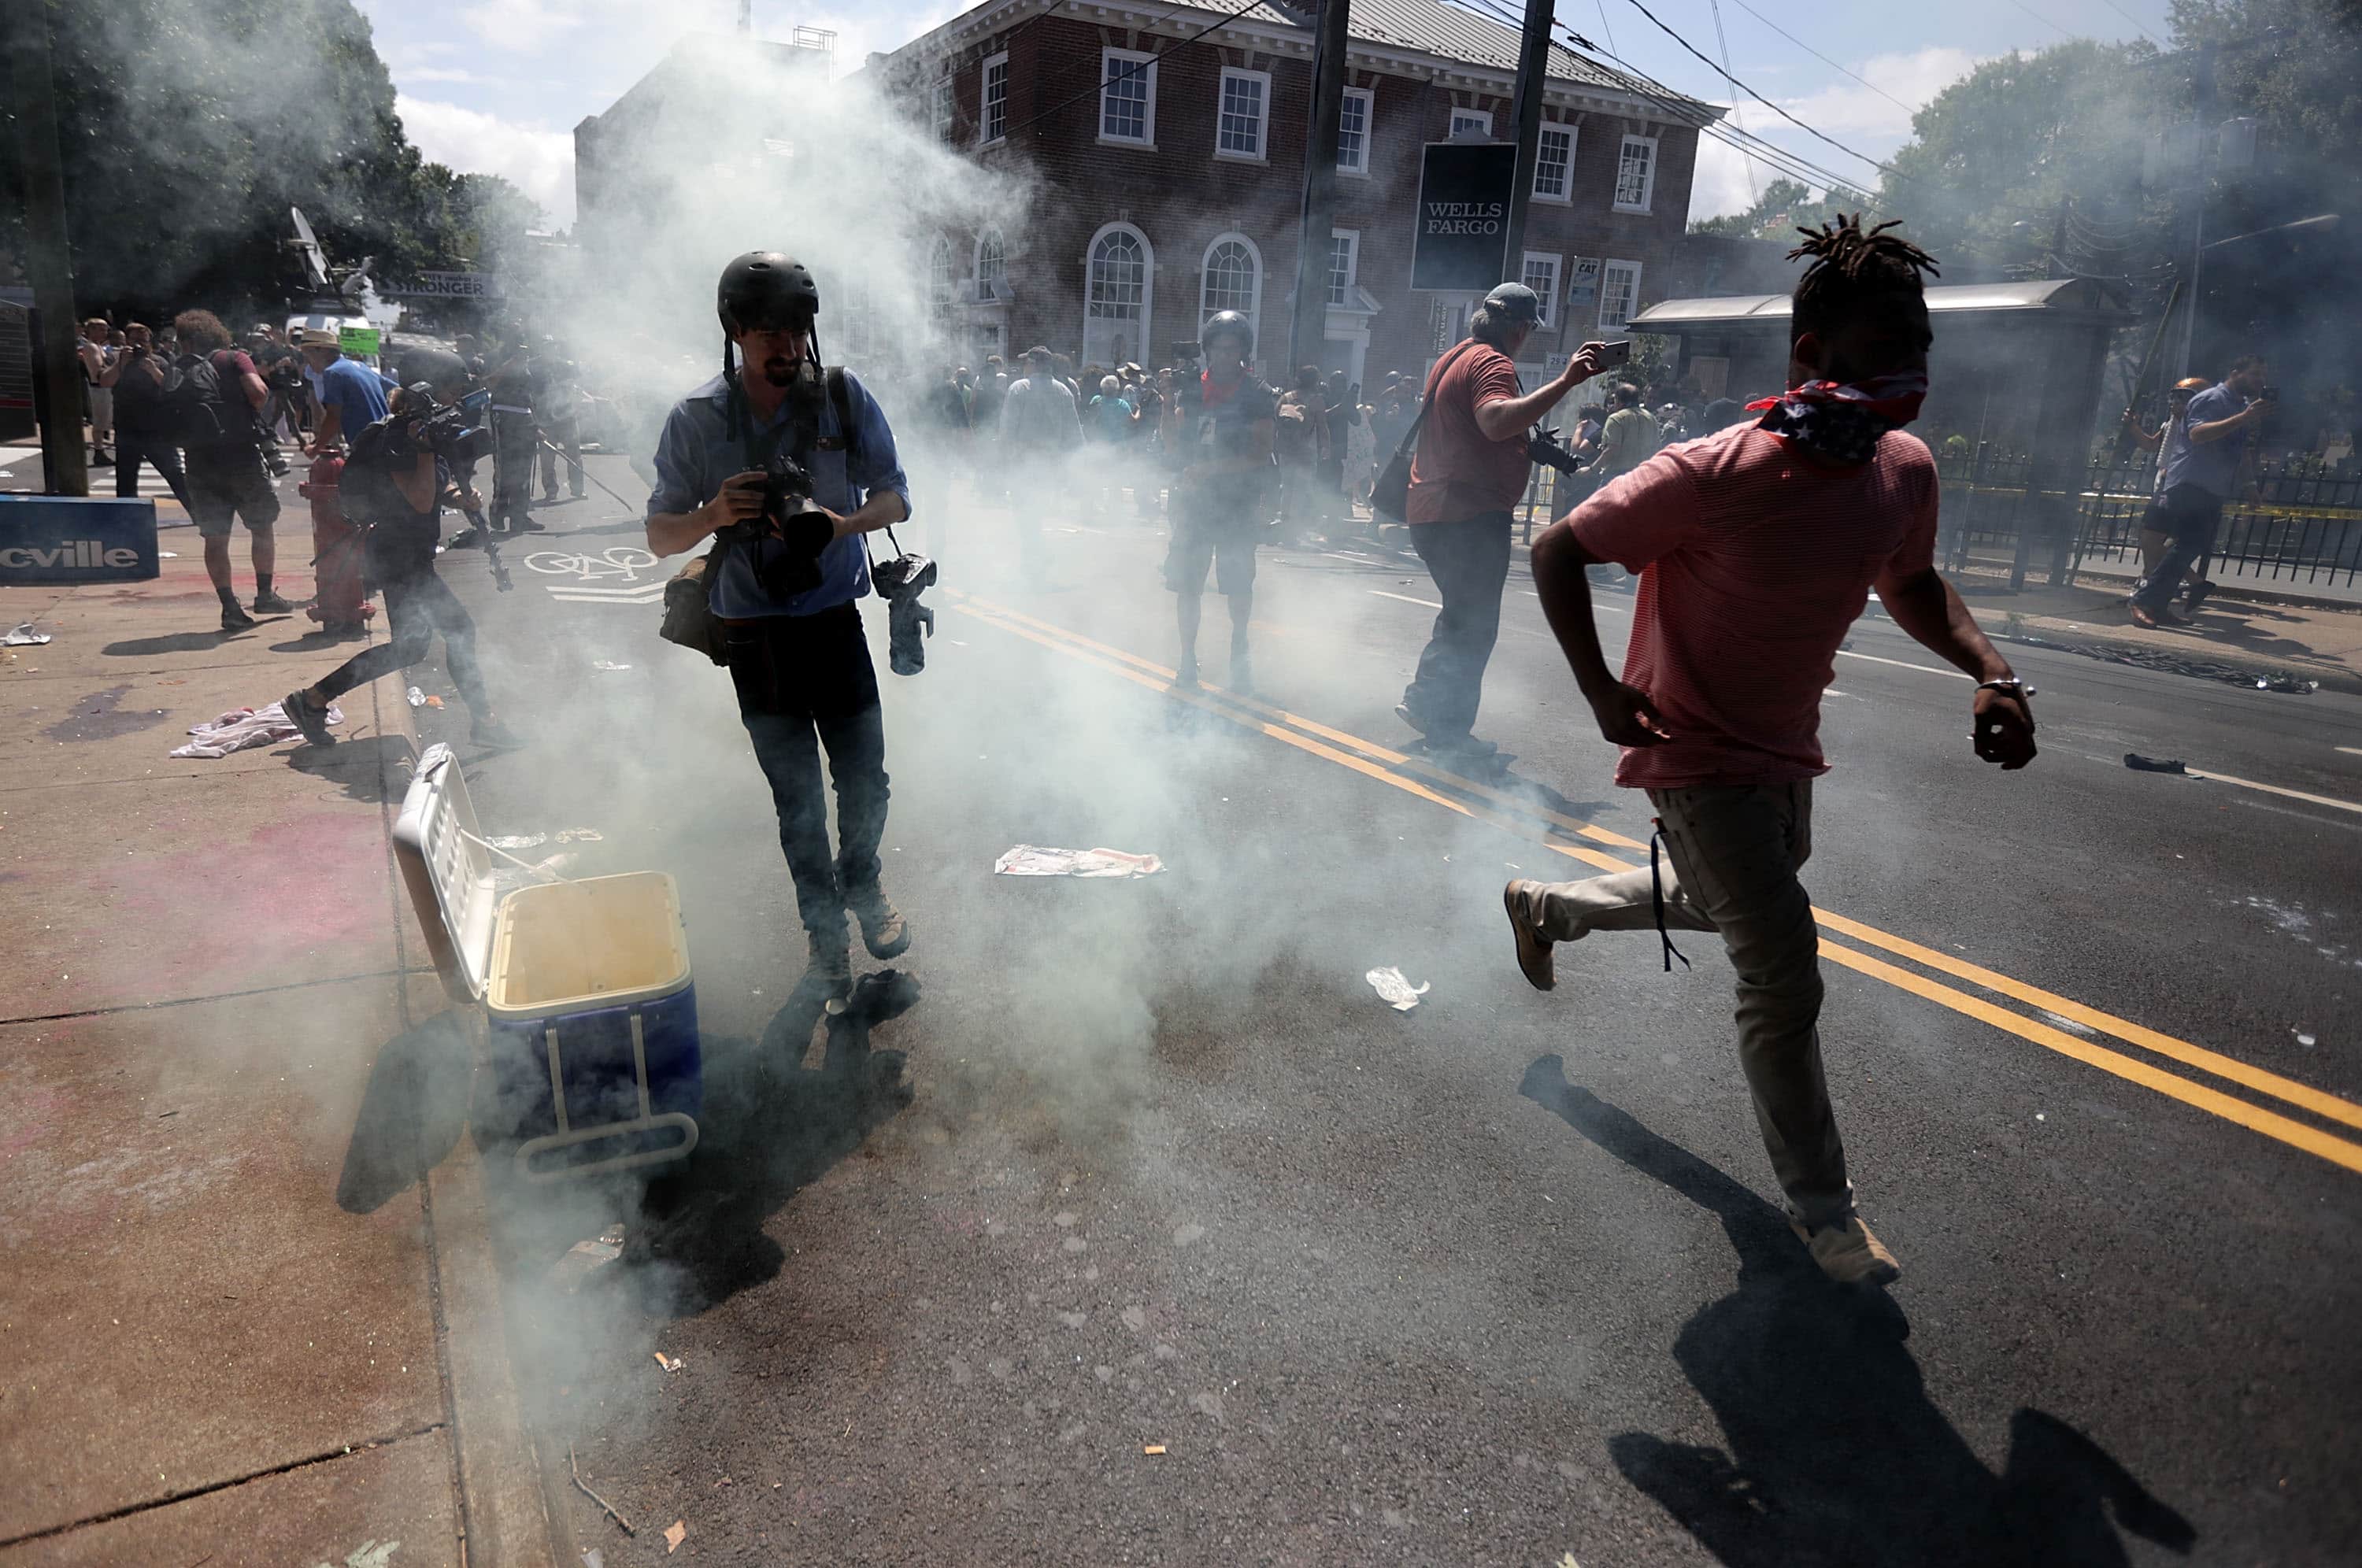 Protesters and journalists pull back after tear gas was used on the outskirts of Emancipation Park during the Unite the Right rally August 12, 2017 in Charlottesville, Virginia, Chip Somodevilla/Getty Images